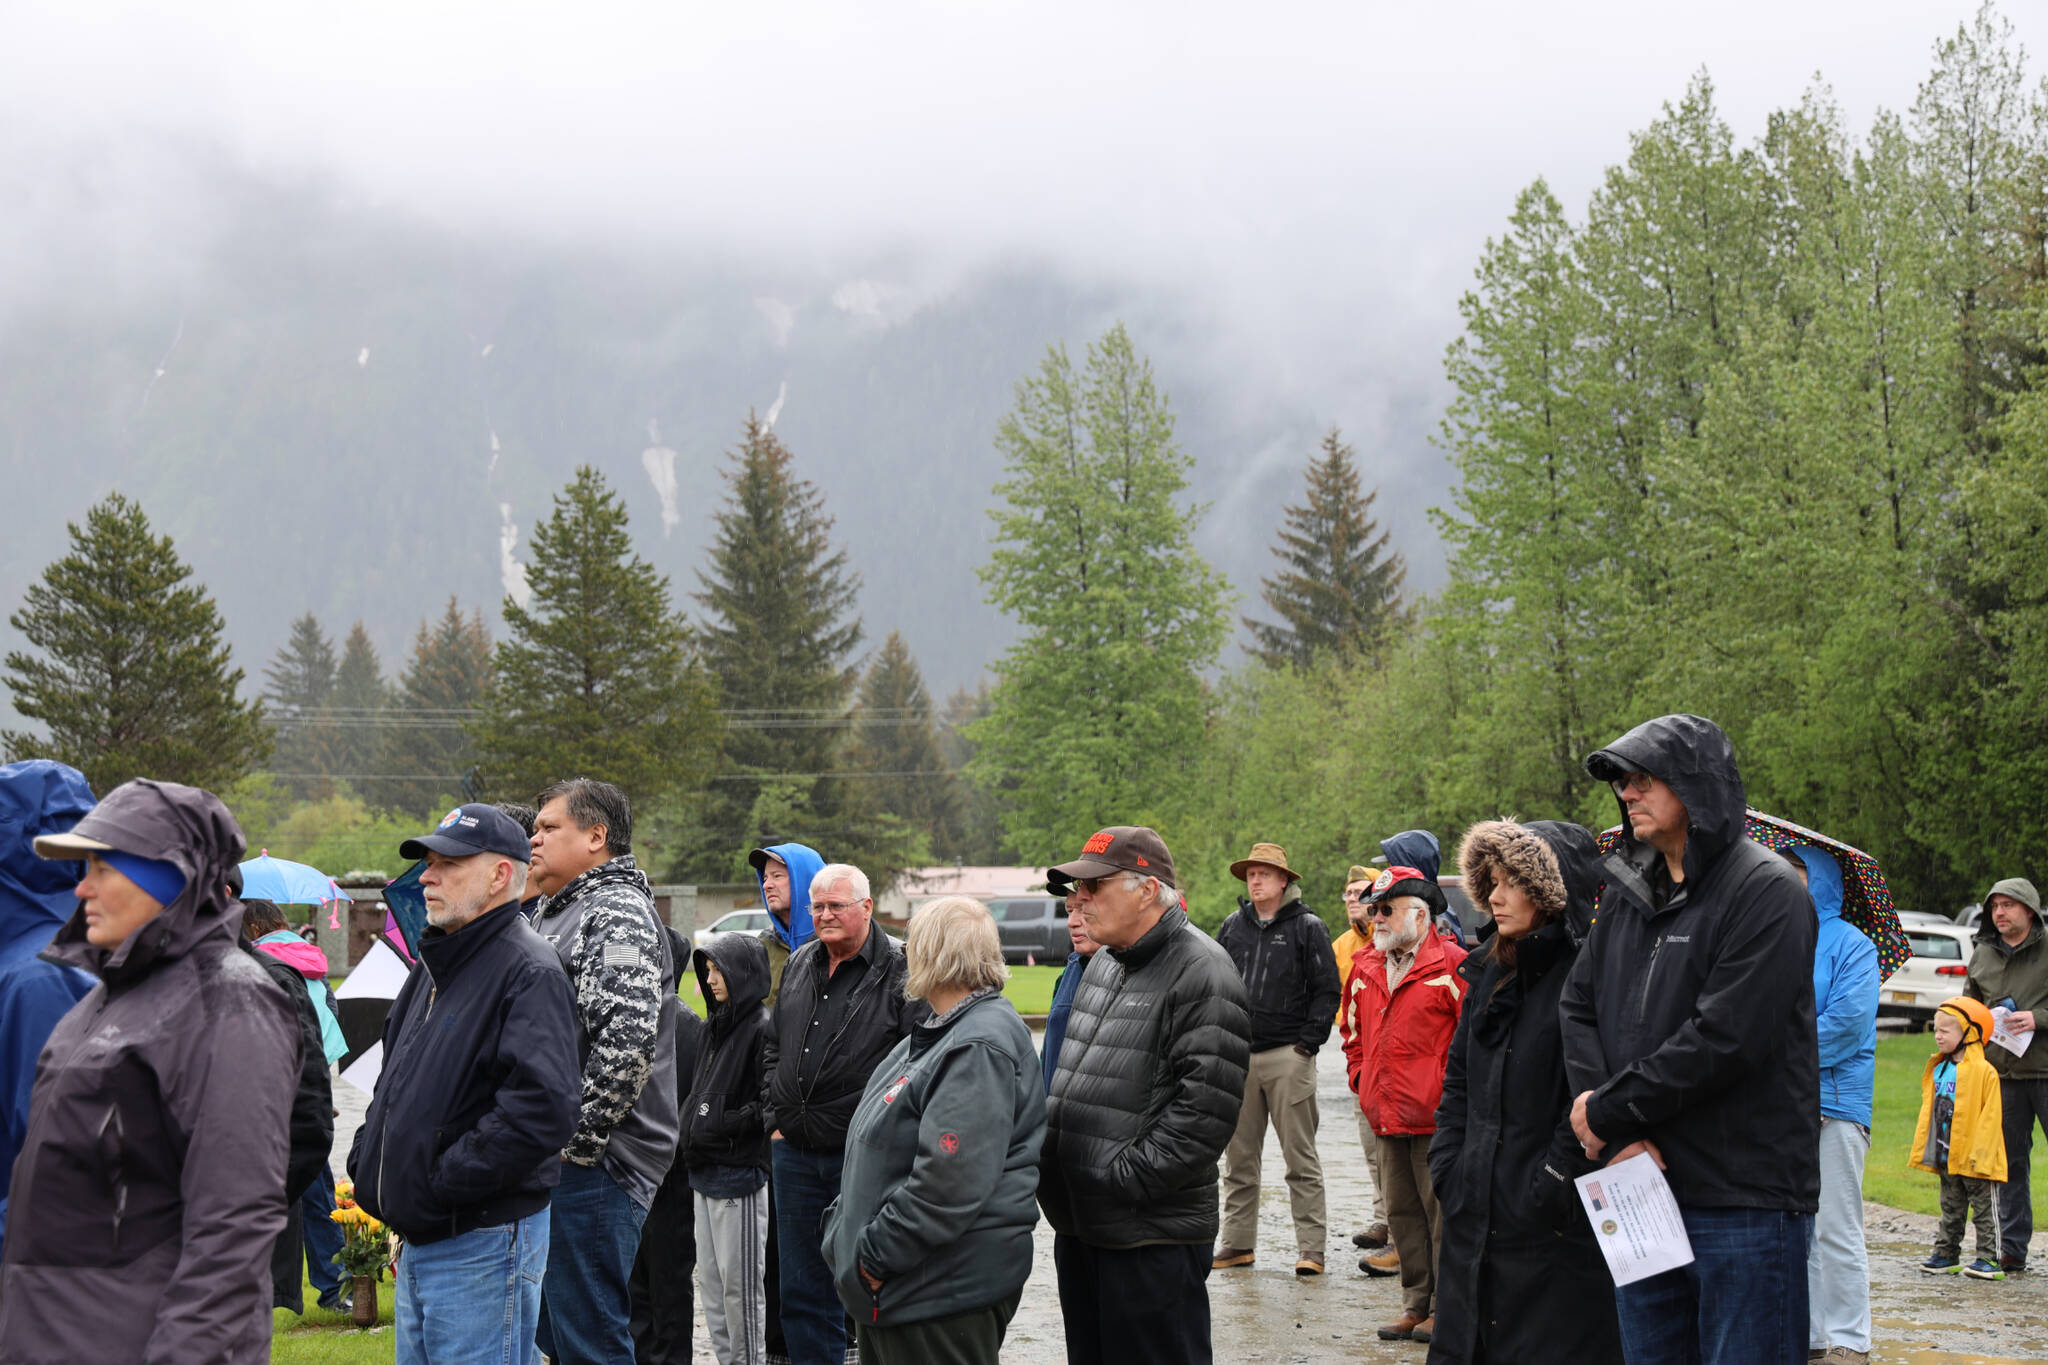 Dozens of Juneau residents and veterans stand in silence at Alaskan Memorial Park as the rain poured down for a service in observance of Memorial Day on Monday morning. (Clarise Larson / Juneau Empire)